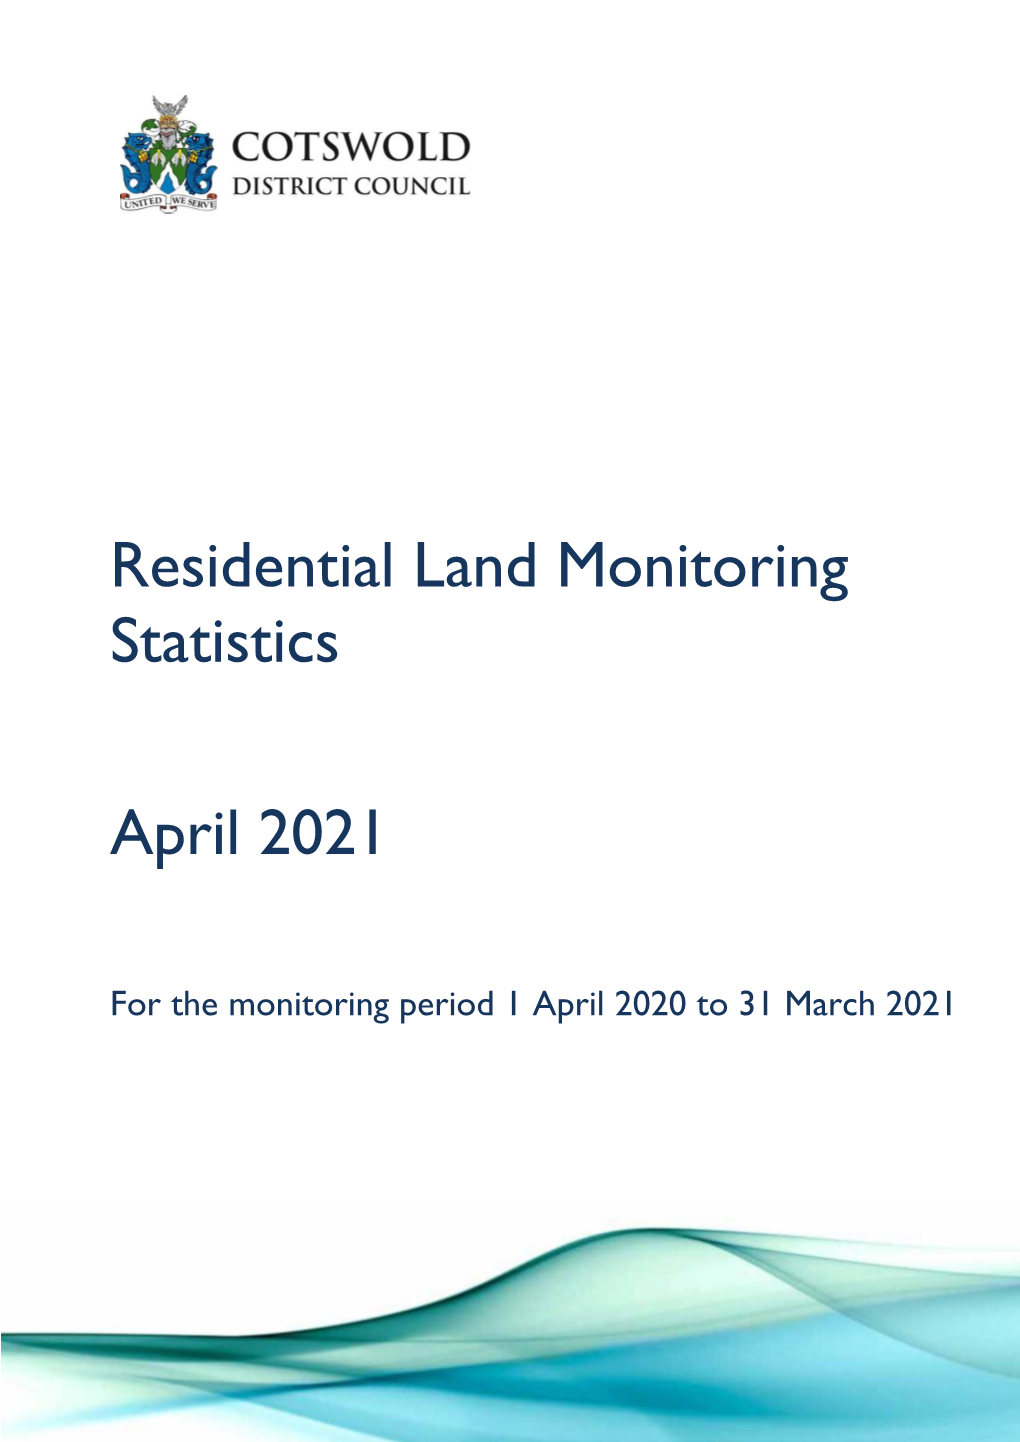 Cotswold District Residential Monitoring Statistics 2019-20